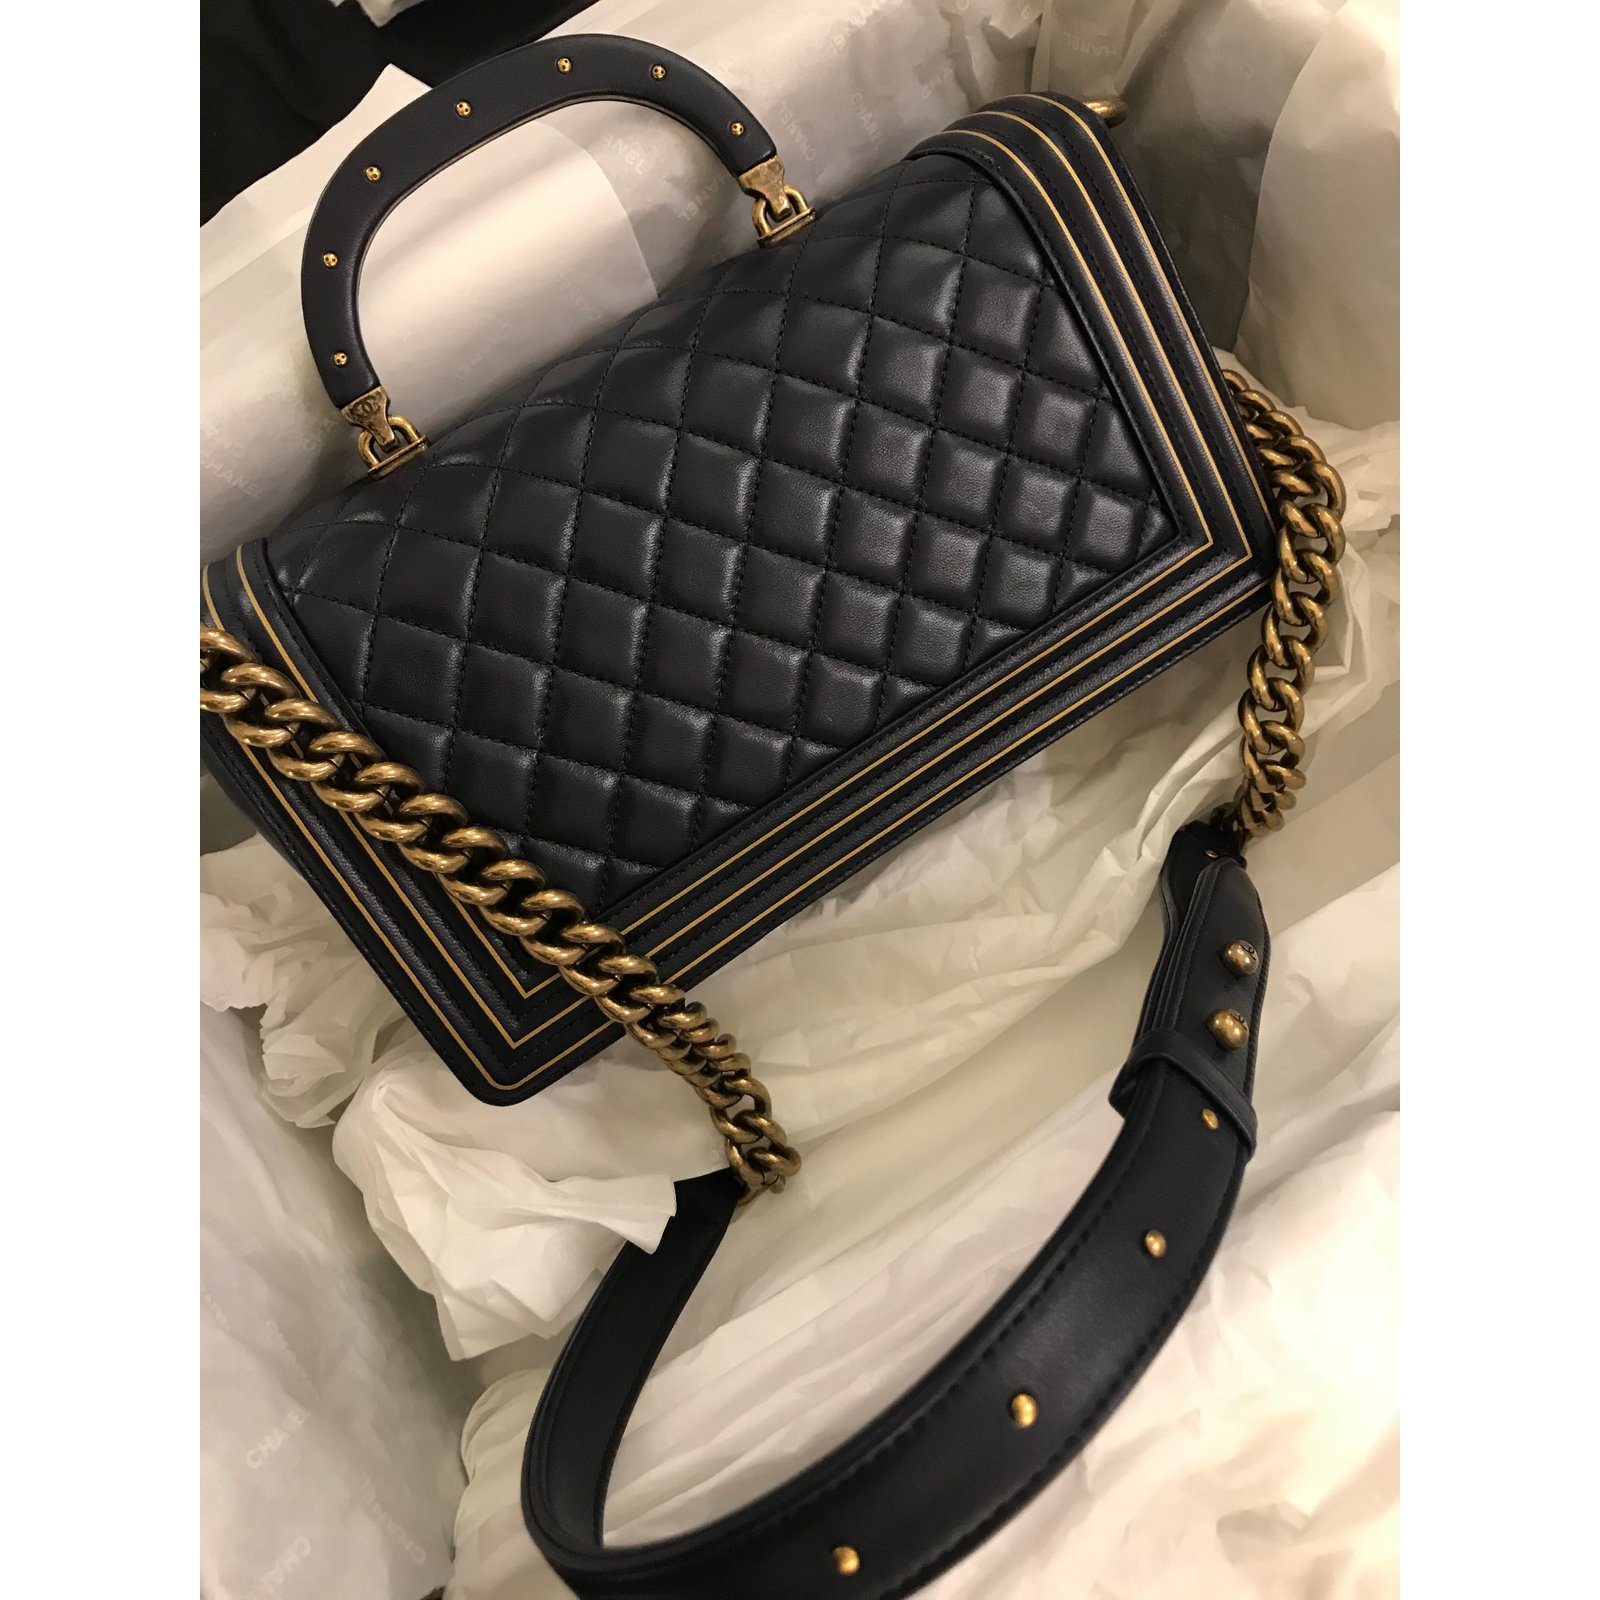 Chanel Chanel Navy Blue Gold Lambskin and Resin BOY STUDDED HANDLE BAG ...